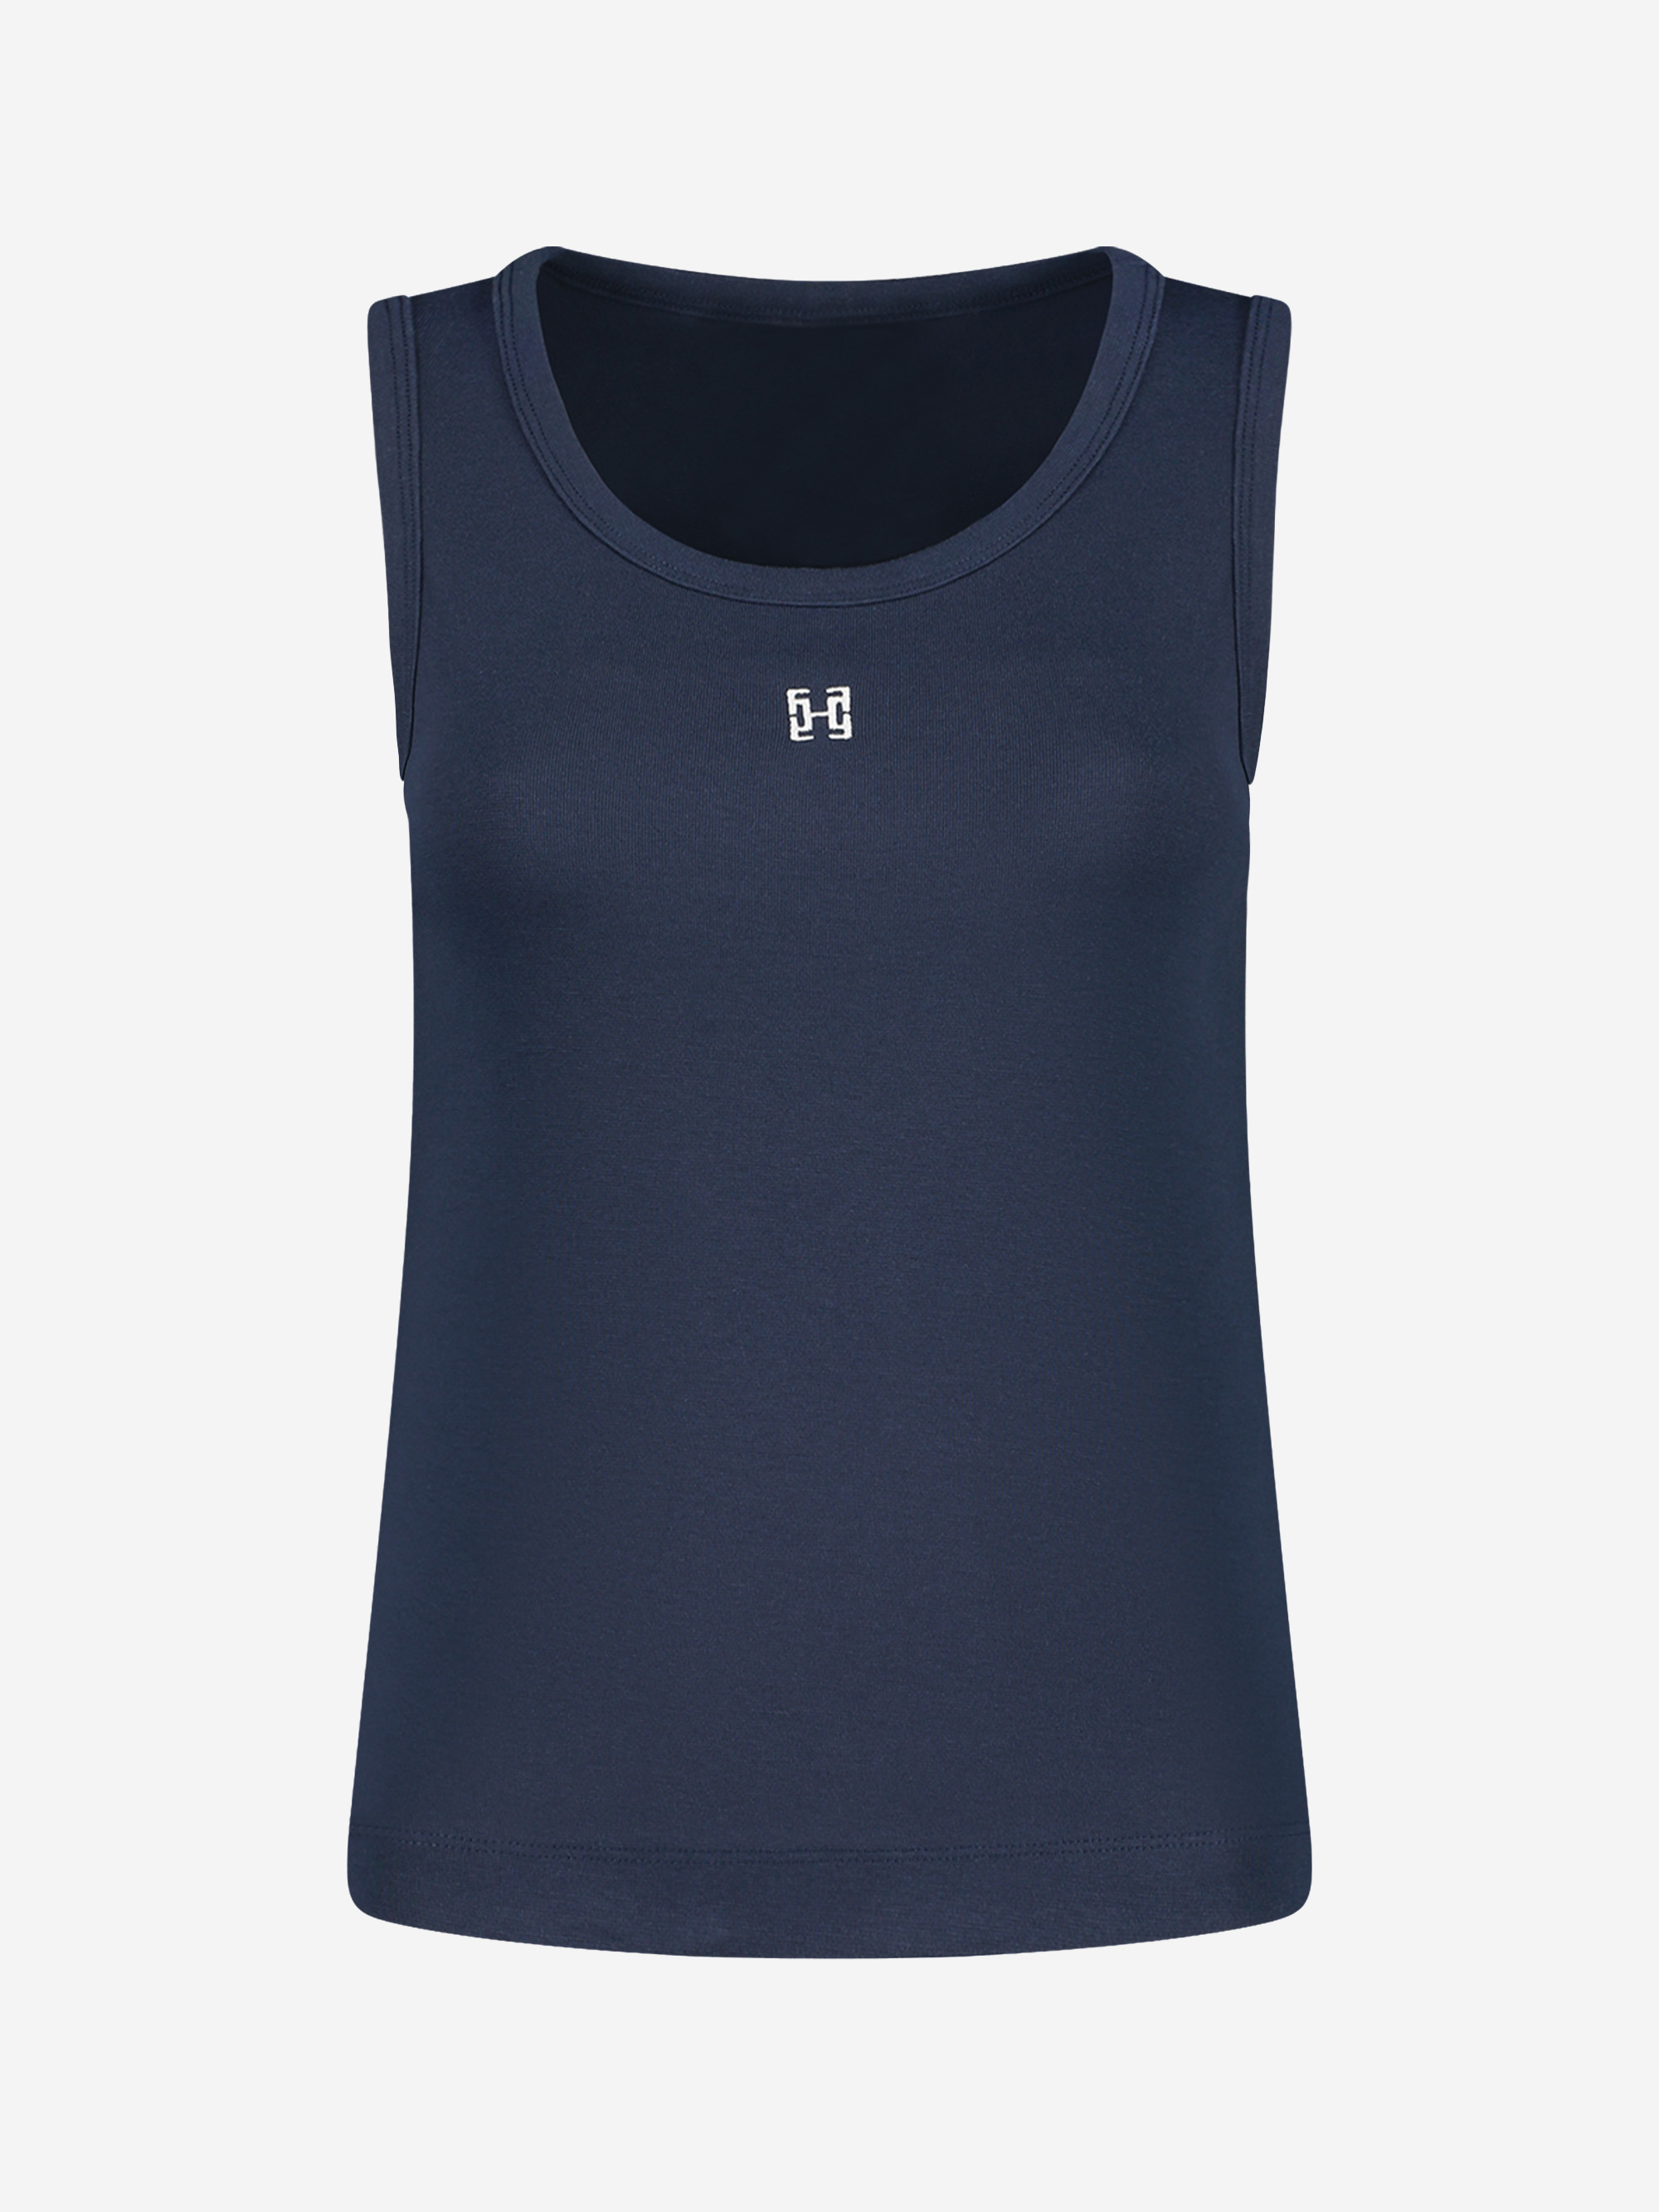 Tank top with FH logo